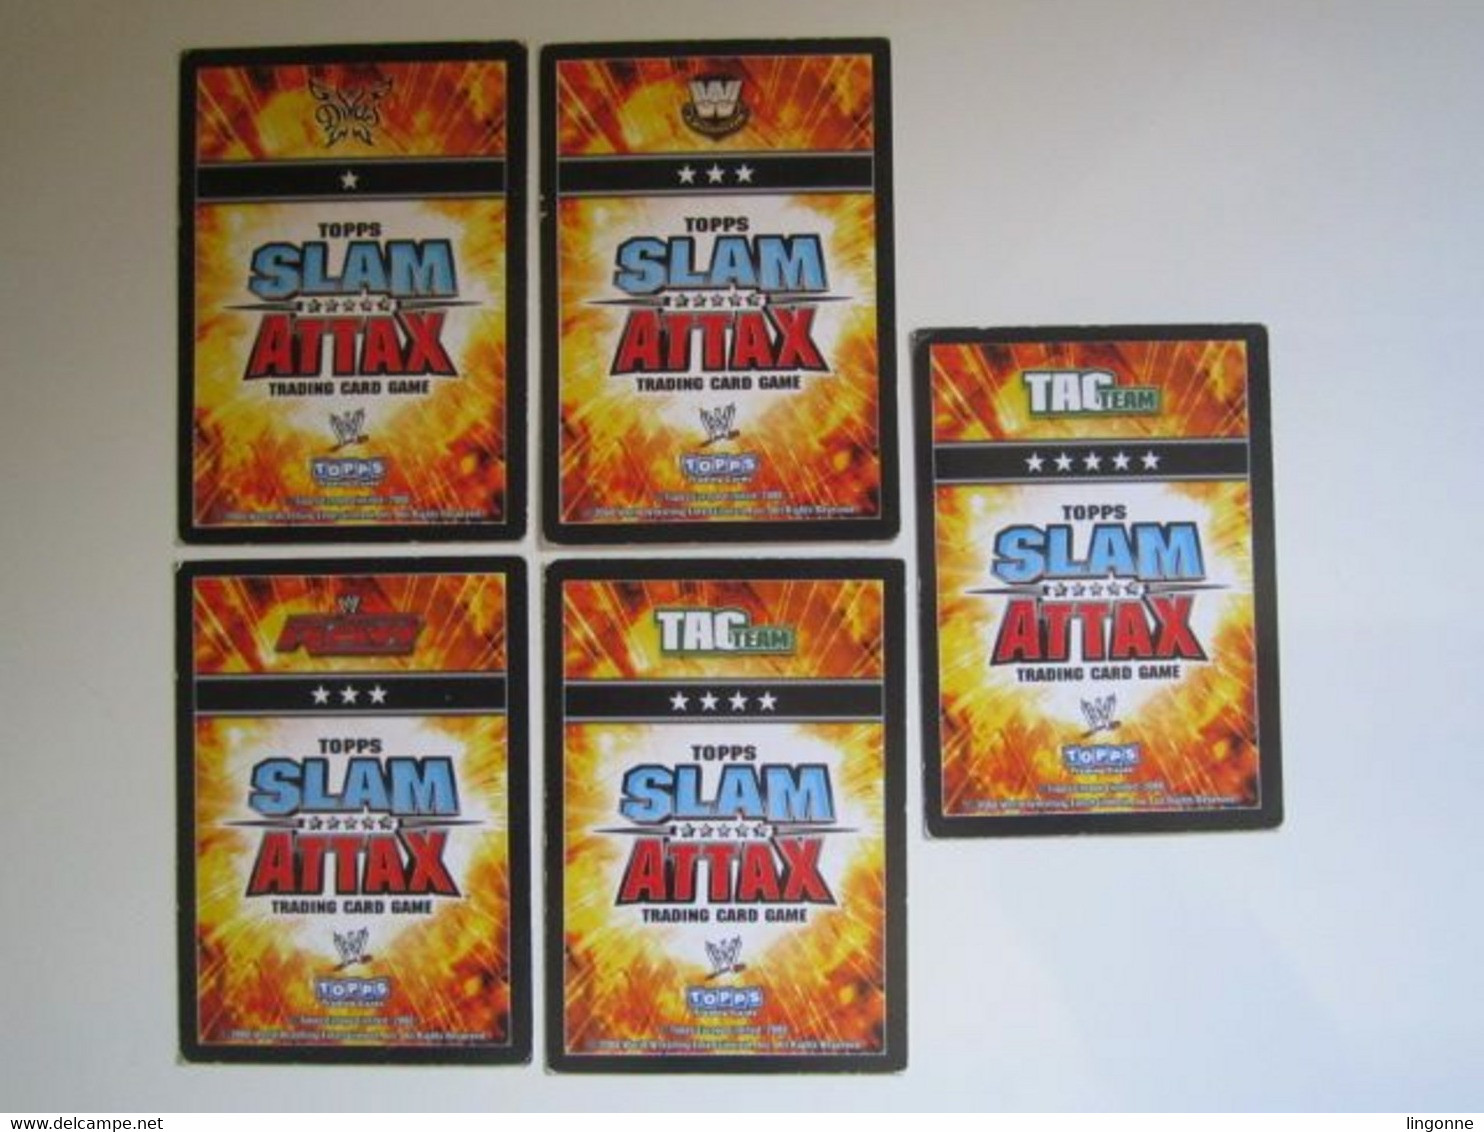 5 Cartes De Catch TOPPS SLAM ATTAX Trading Card Game - Trading Cards